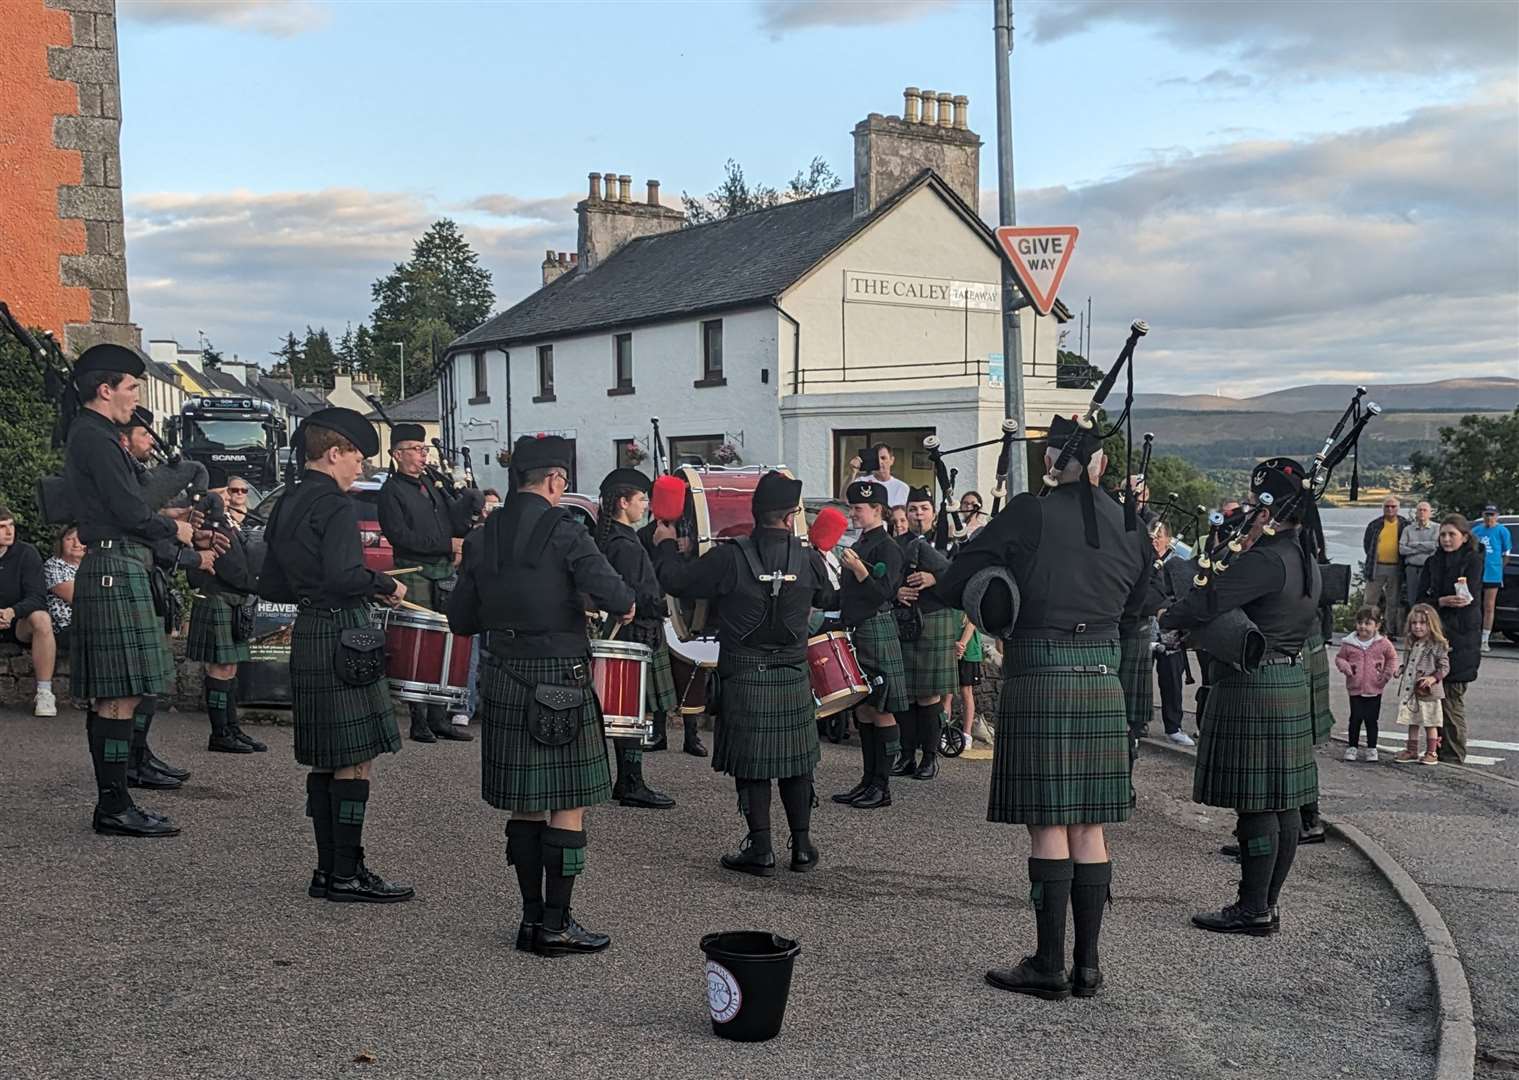 A performance by Ardross Pipe Band signalled the start of the Kyle of Sutherland Gala weekend.